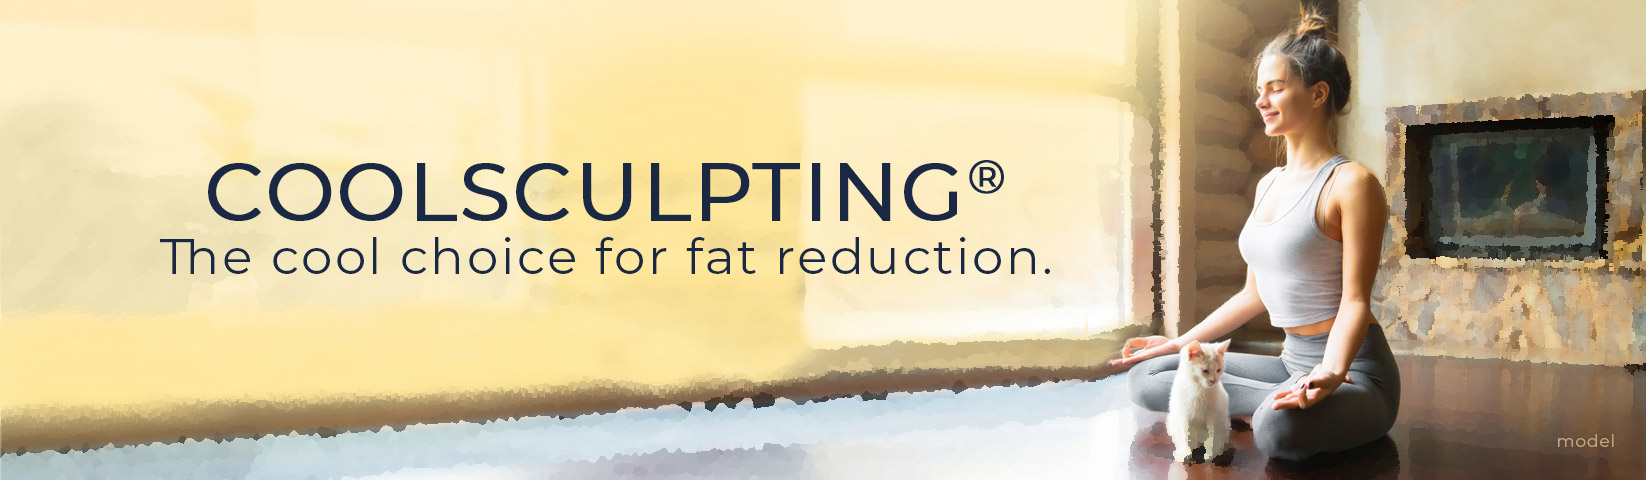 CoolSculpting: The Cool Choice for Fat Reduction